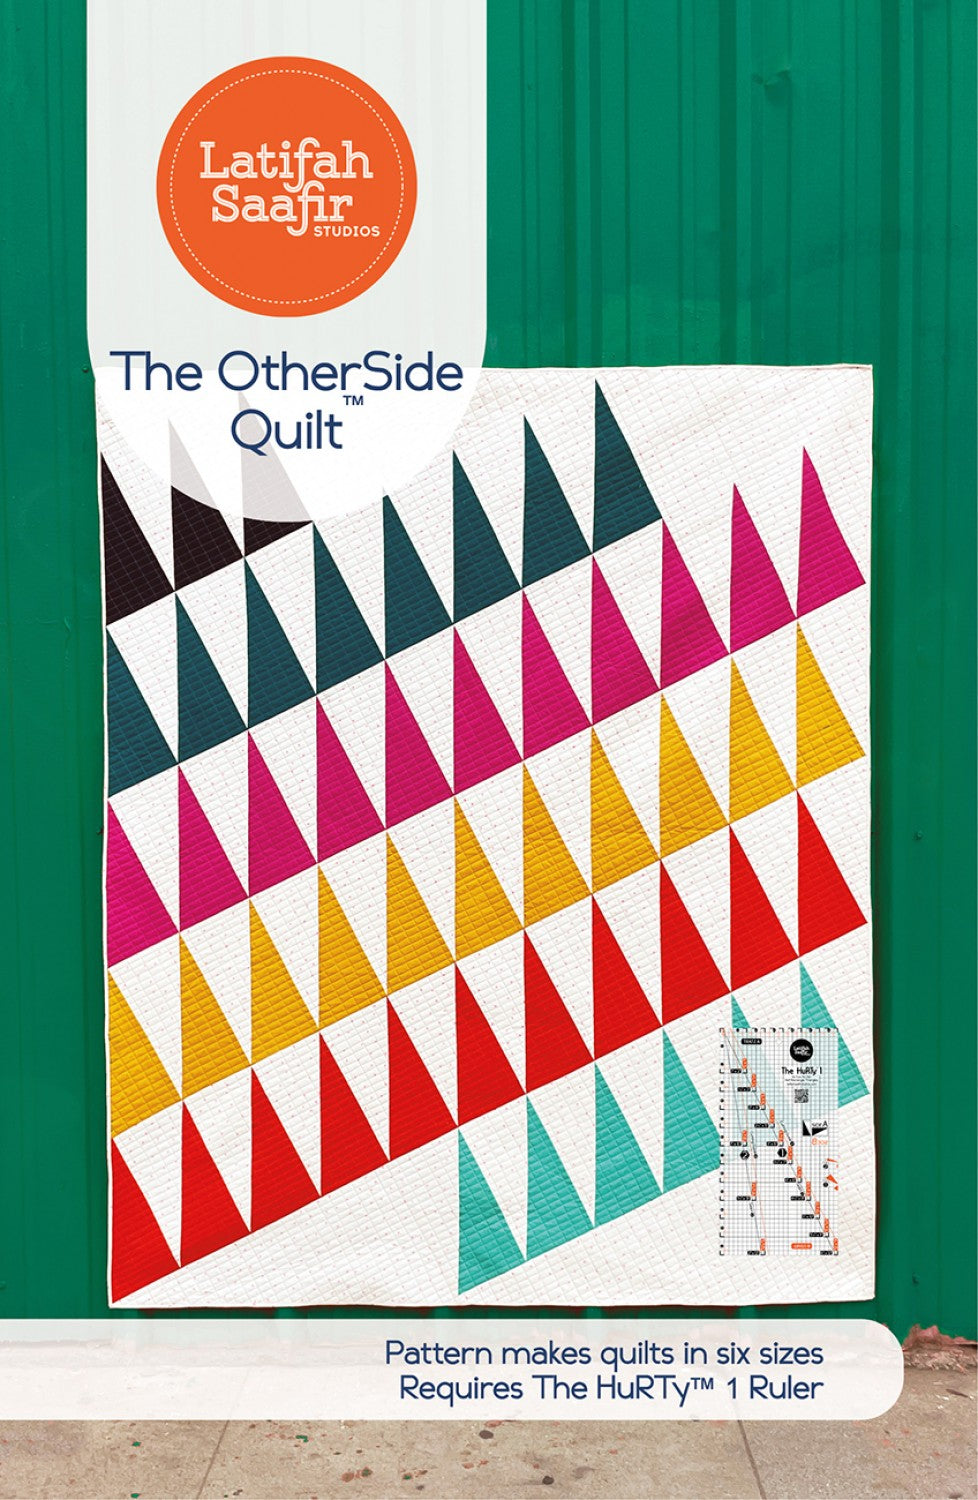 The Otherside Quilt Pattern for Baby to King Size Quilts by Latifah Saafir